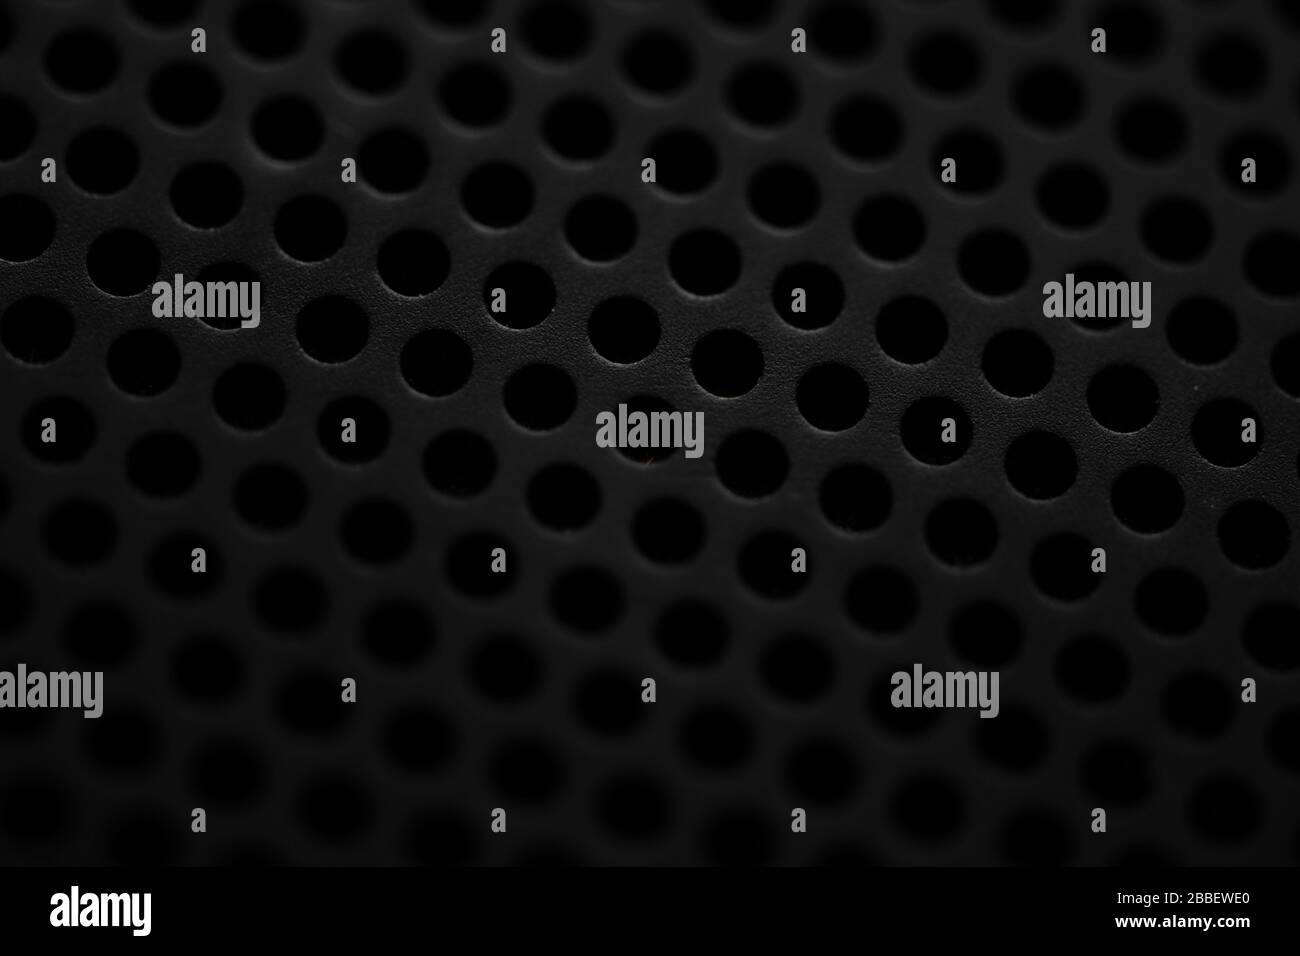 A set of numbers (1234567890), silver metal perforated with small holes  isolated on white background close-up Stock Photo - Alamy